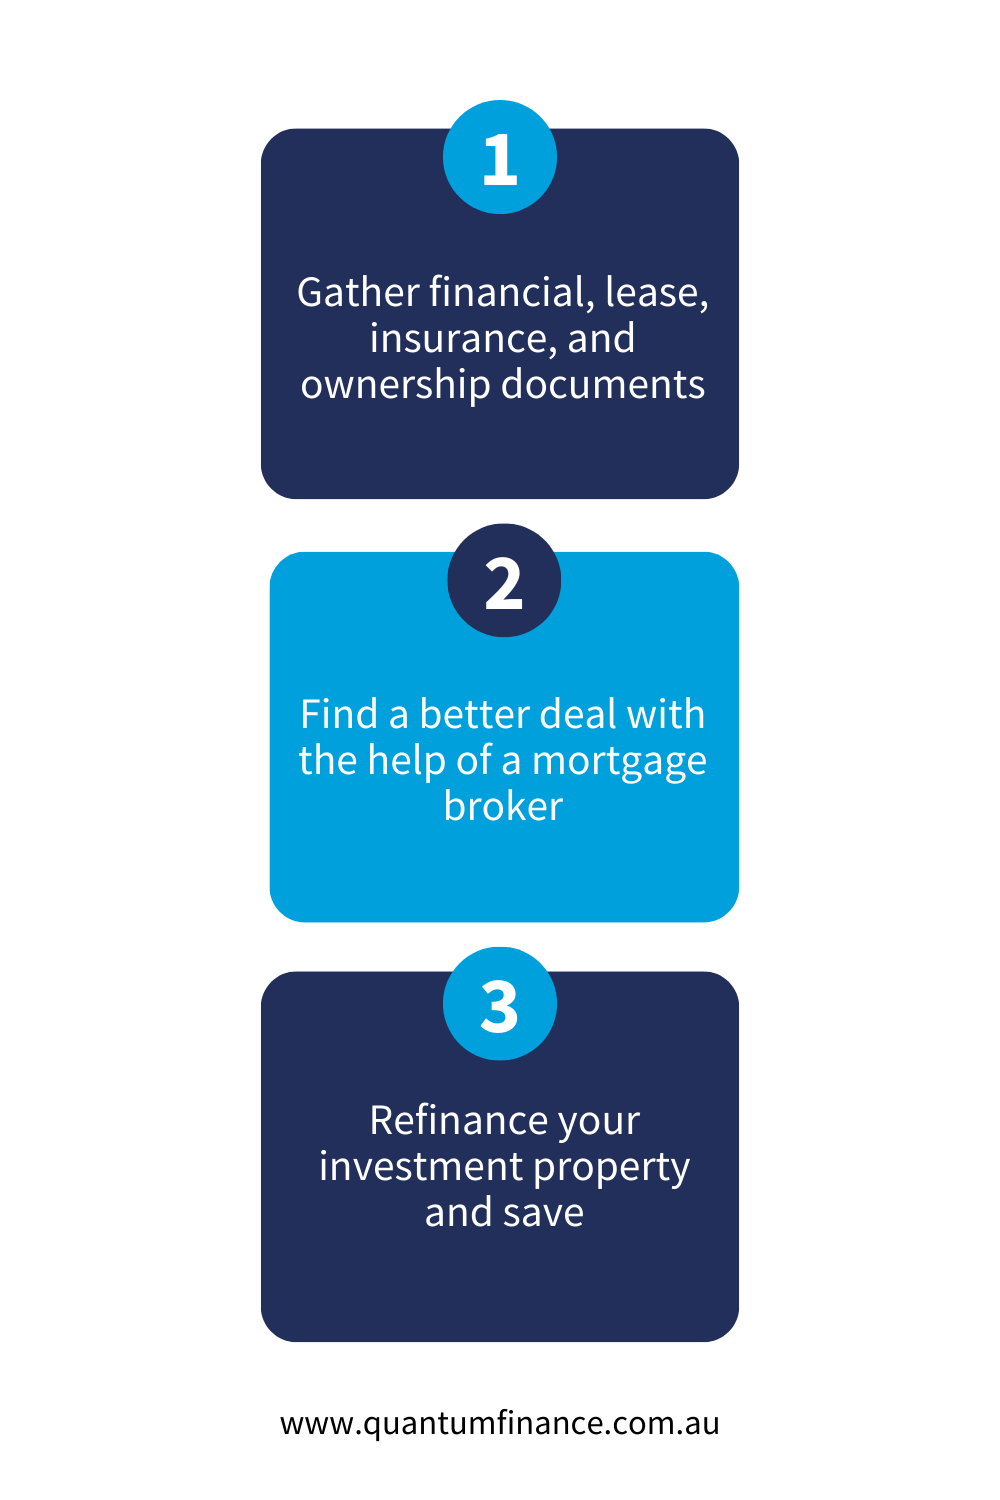 Infographic showing three steps to refinancing an investment property